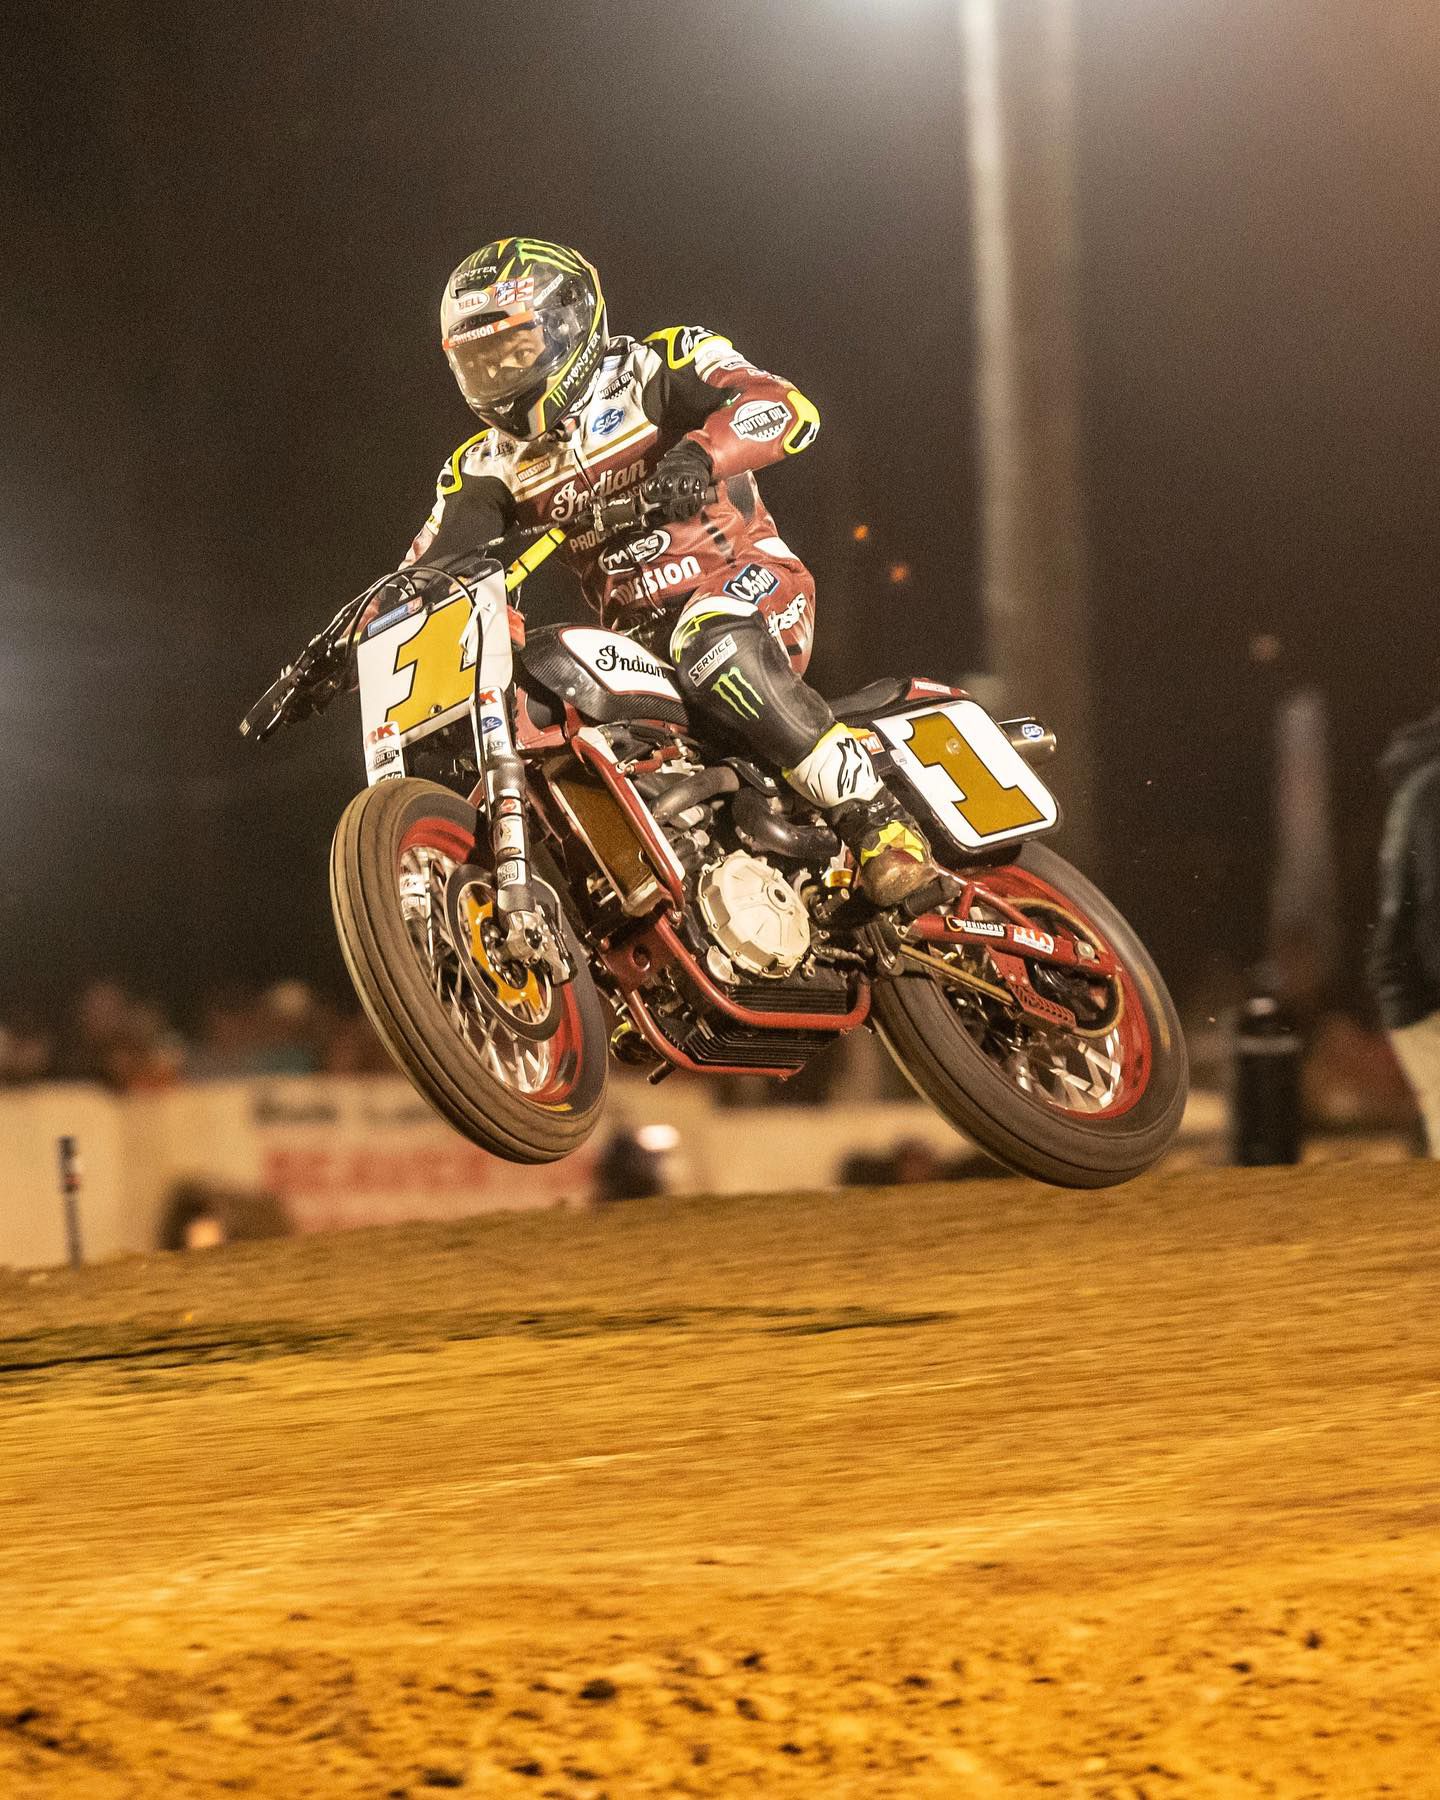 Jared Mees is looking to defend his title. Facebook